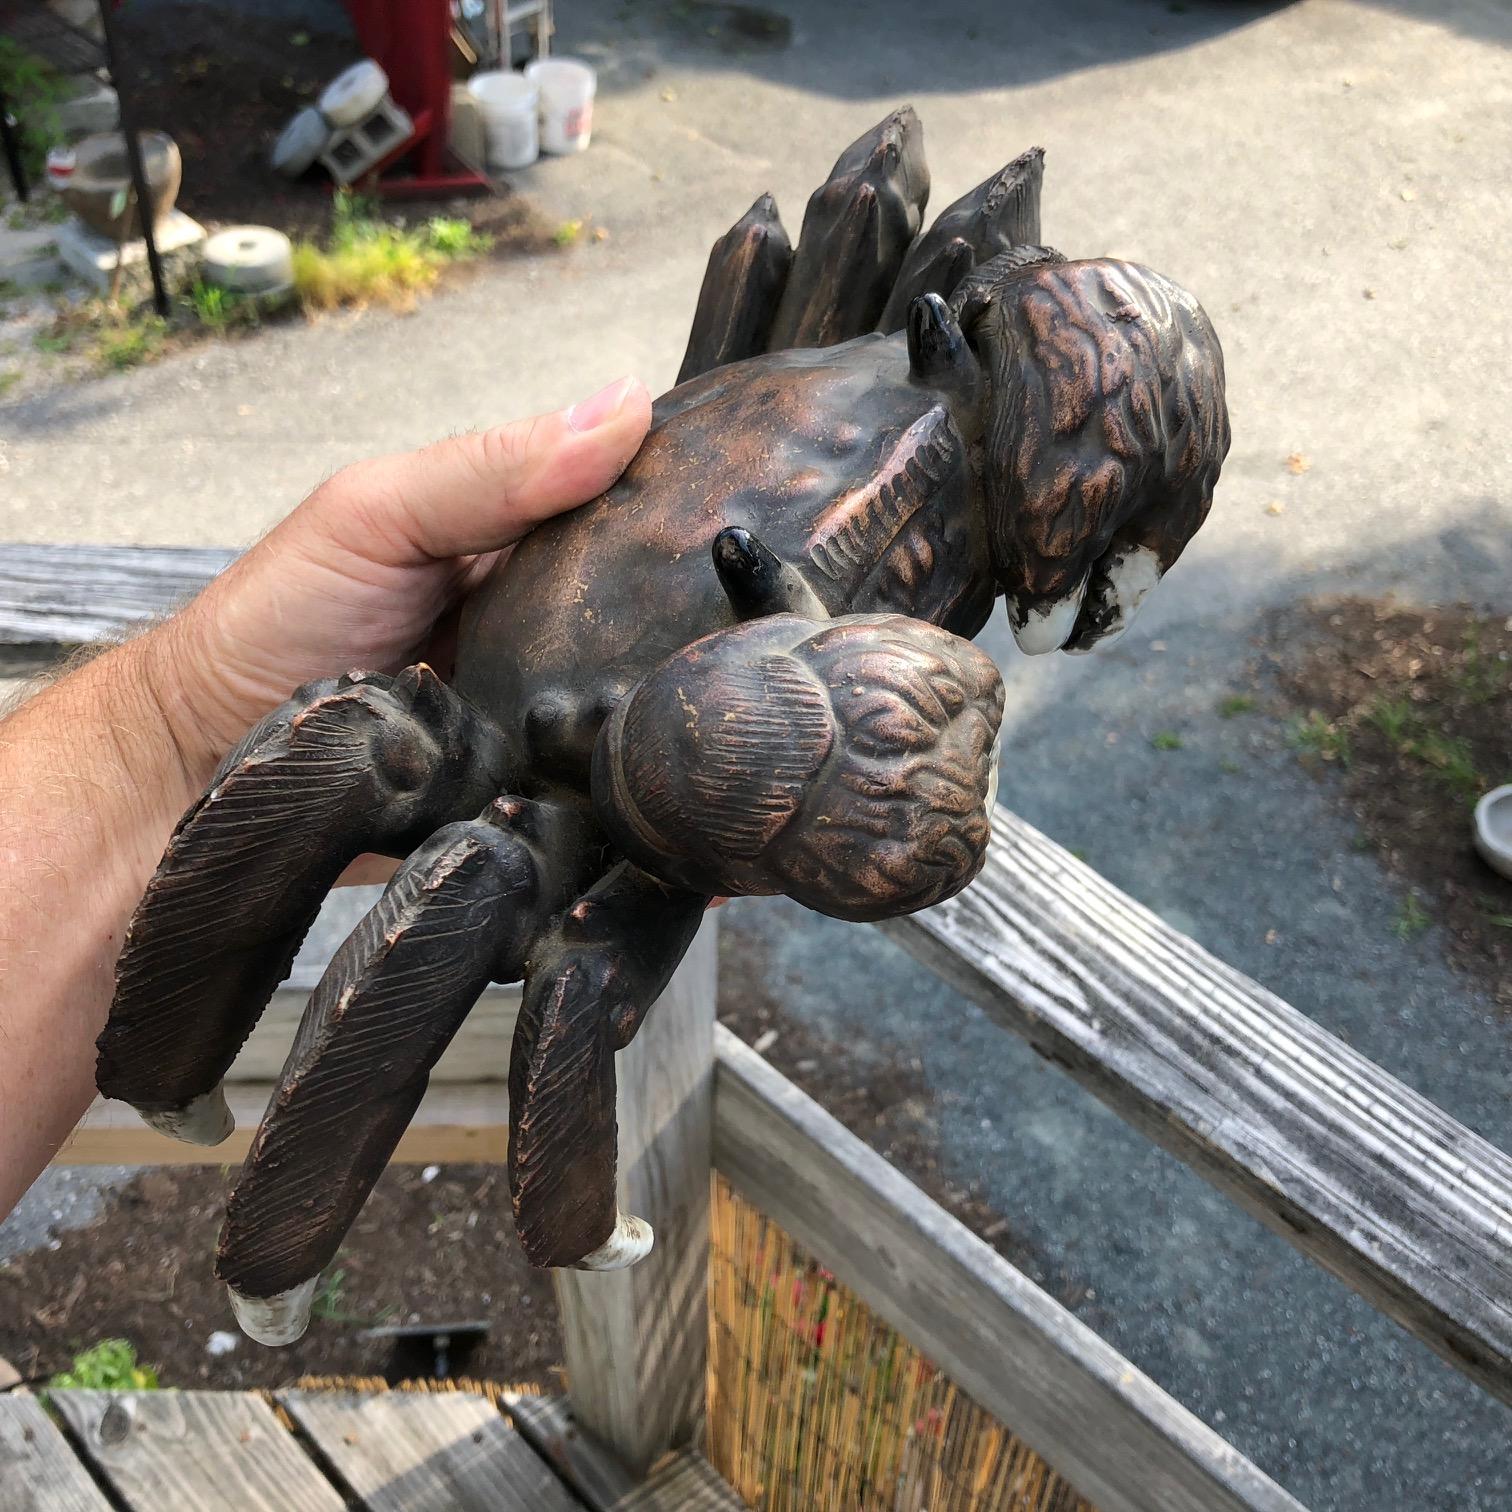 From our most recent Japanese acquisition travels.

One of a pair.

A fine genuinely antique Japanese handcrafted multi legged glazed heavy thick pottery crab in an authentic life form with a real life looking, authentic hand glazed finish